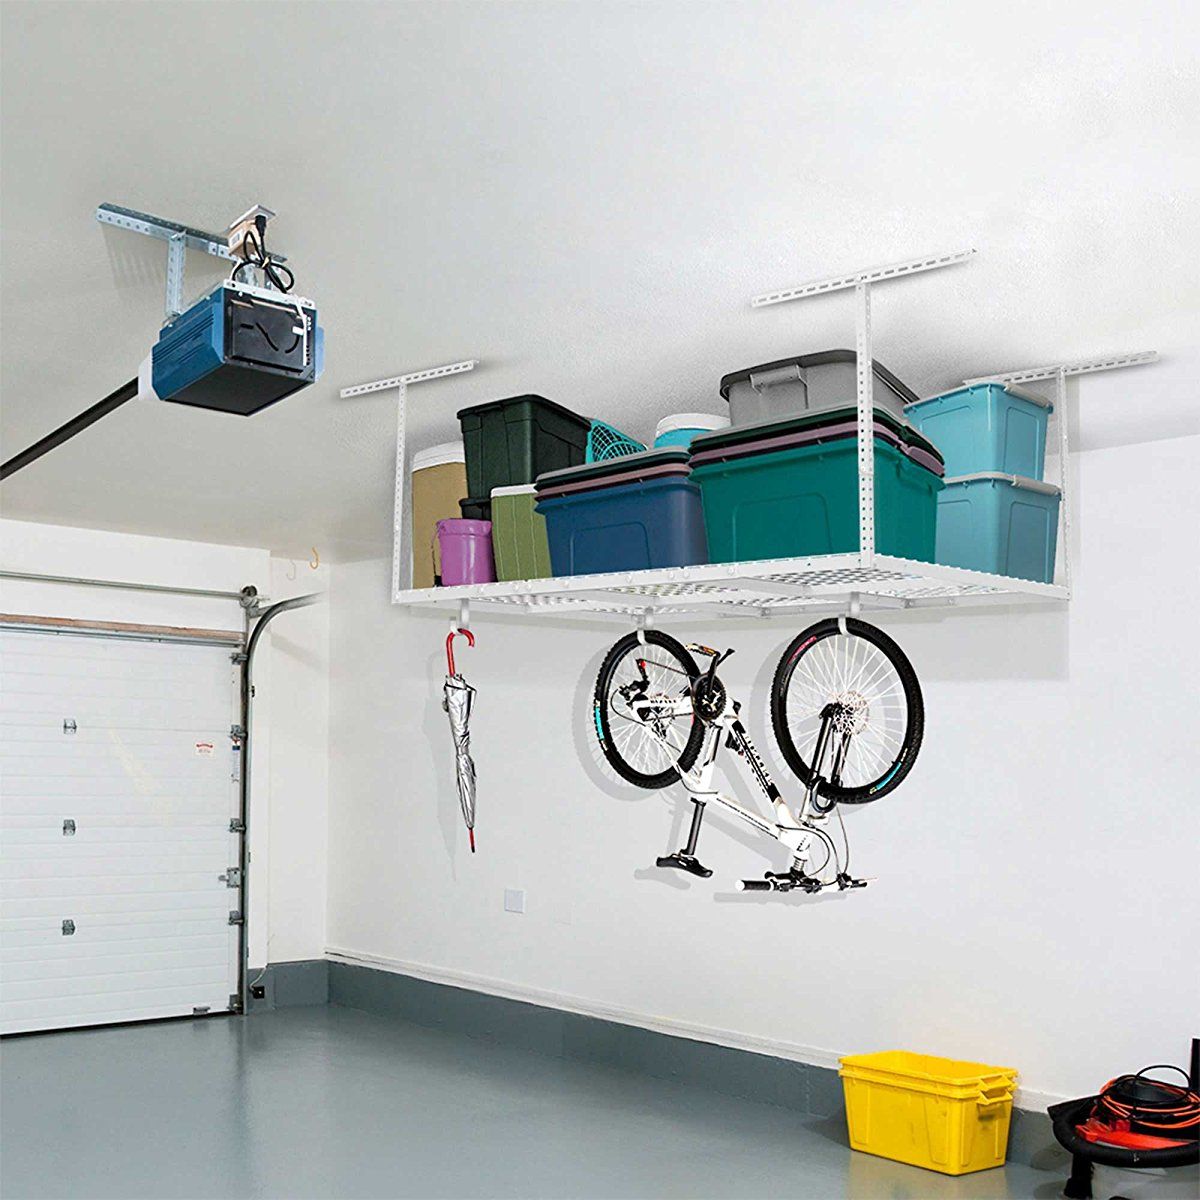 Ceiling Mounted Rack [Bike, Surfboard, Clothes Drying & Wine]